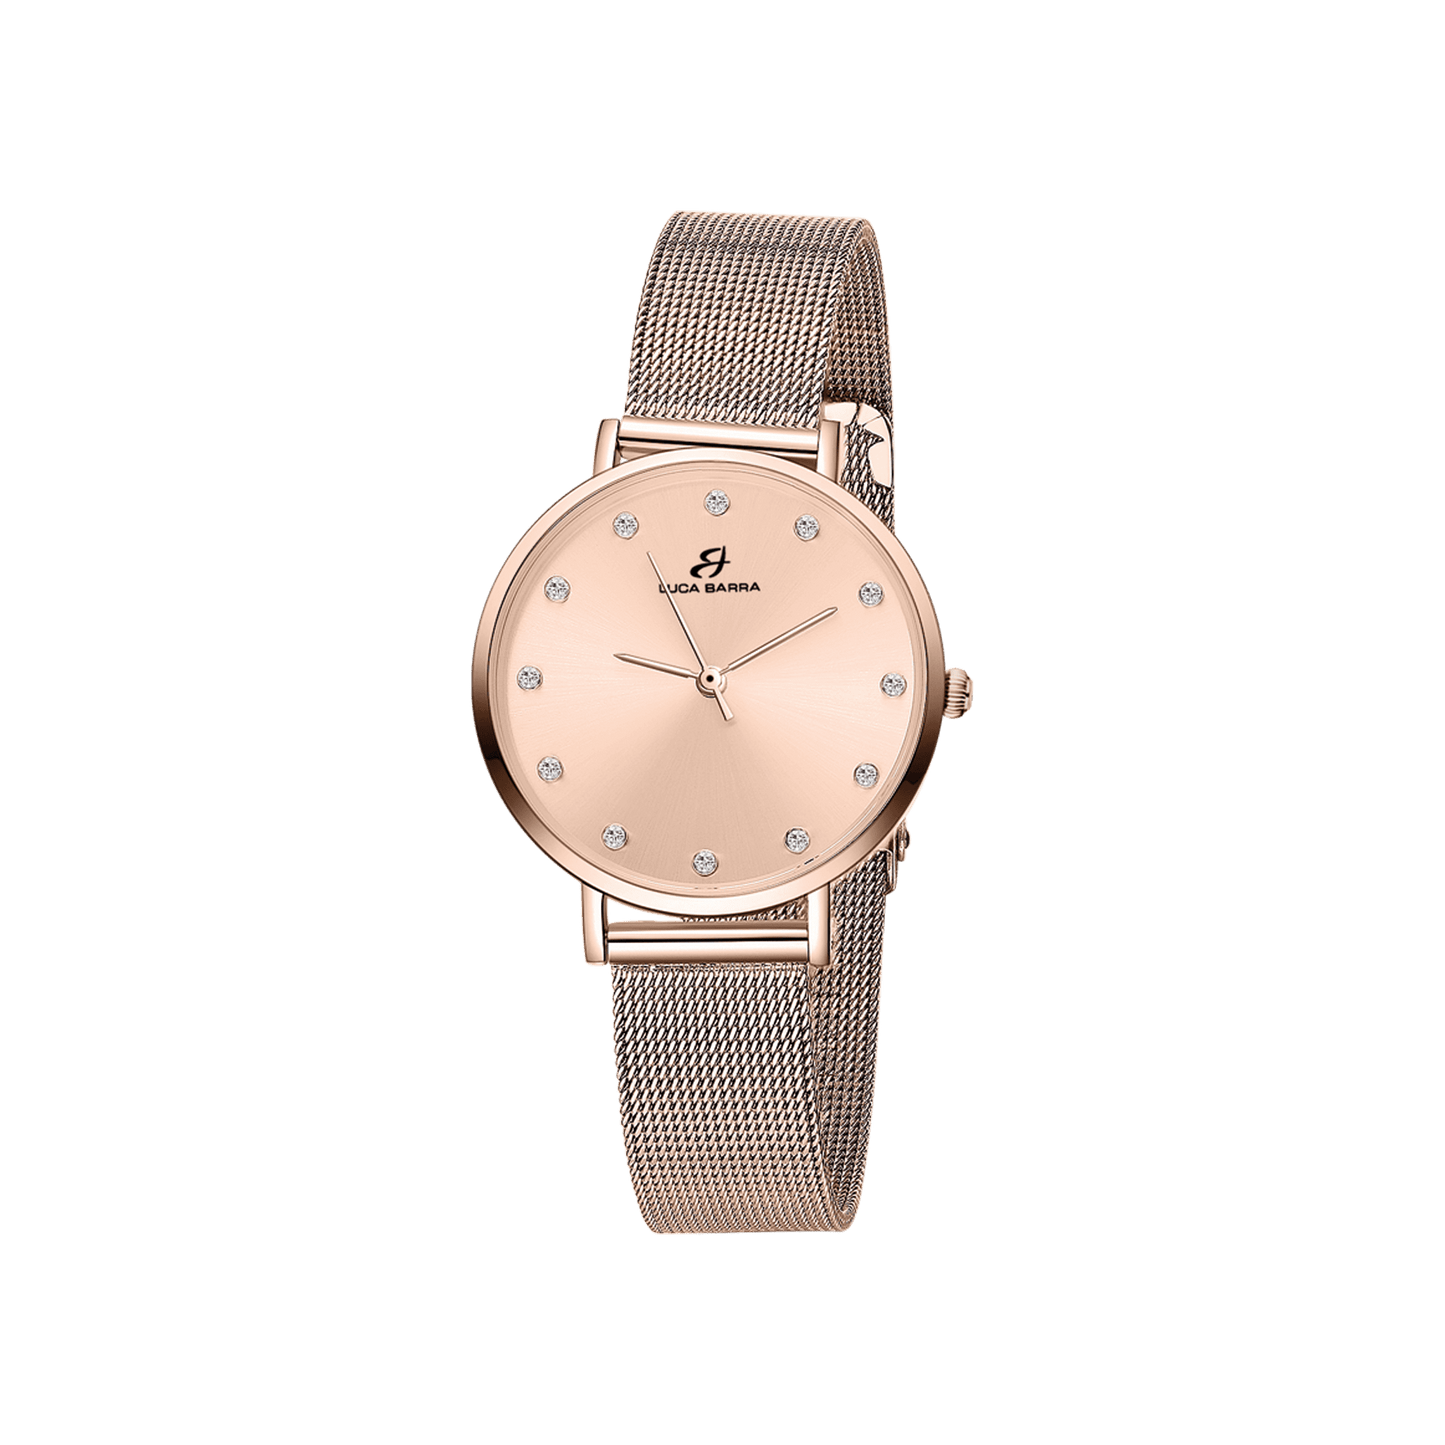 WOMAN'S WATCH IN PINK STAINLESS STEEL WITH CASE Luca Barra